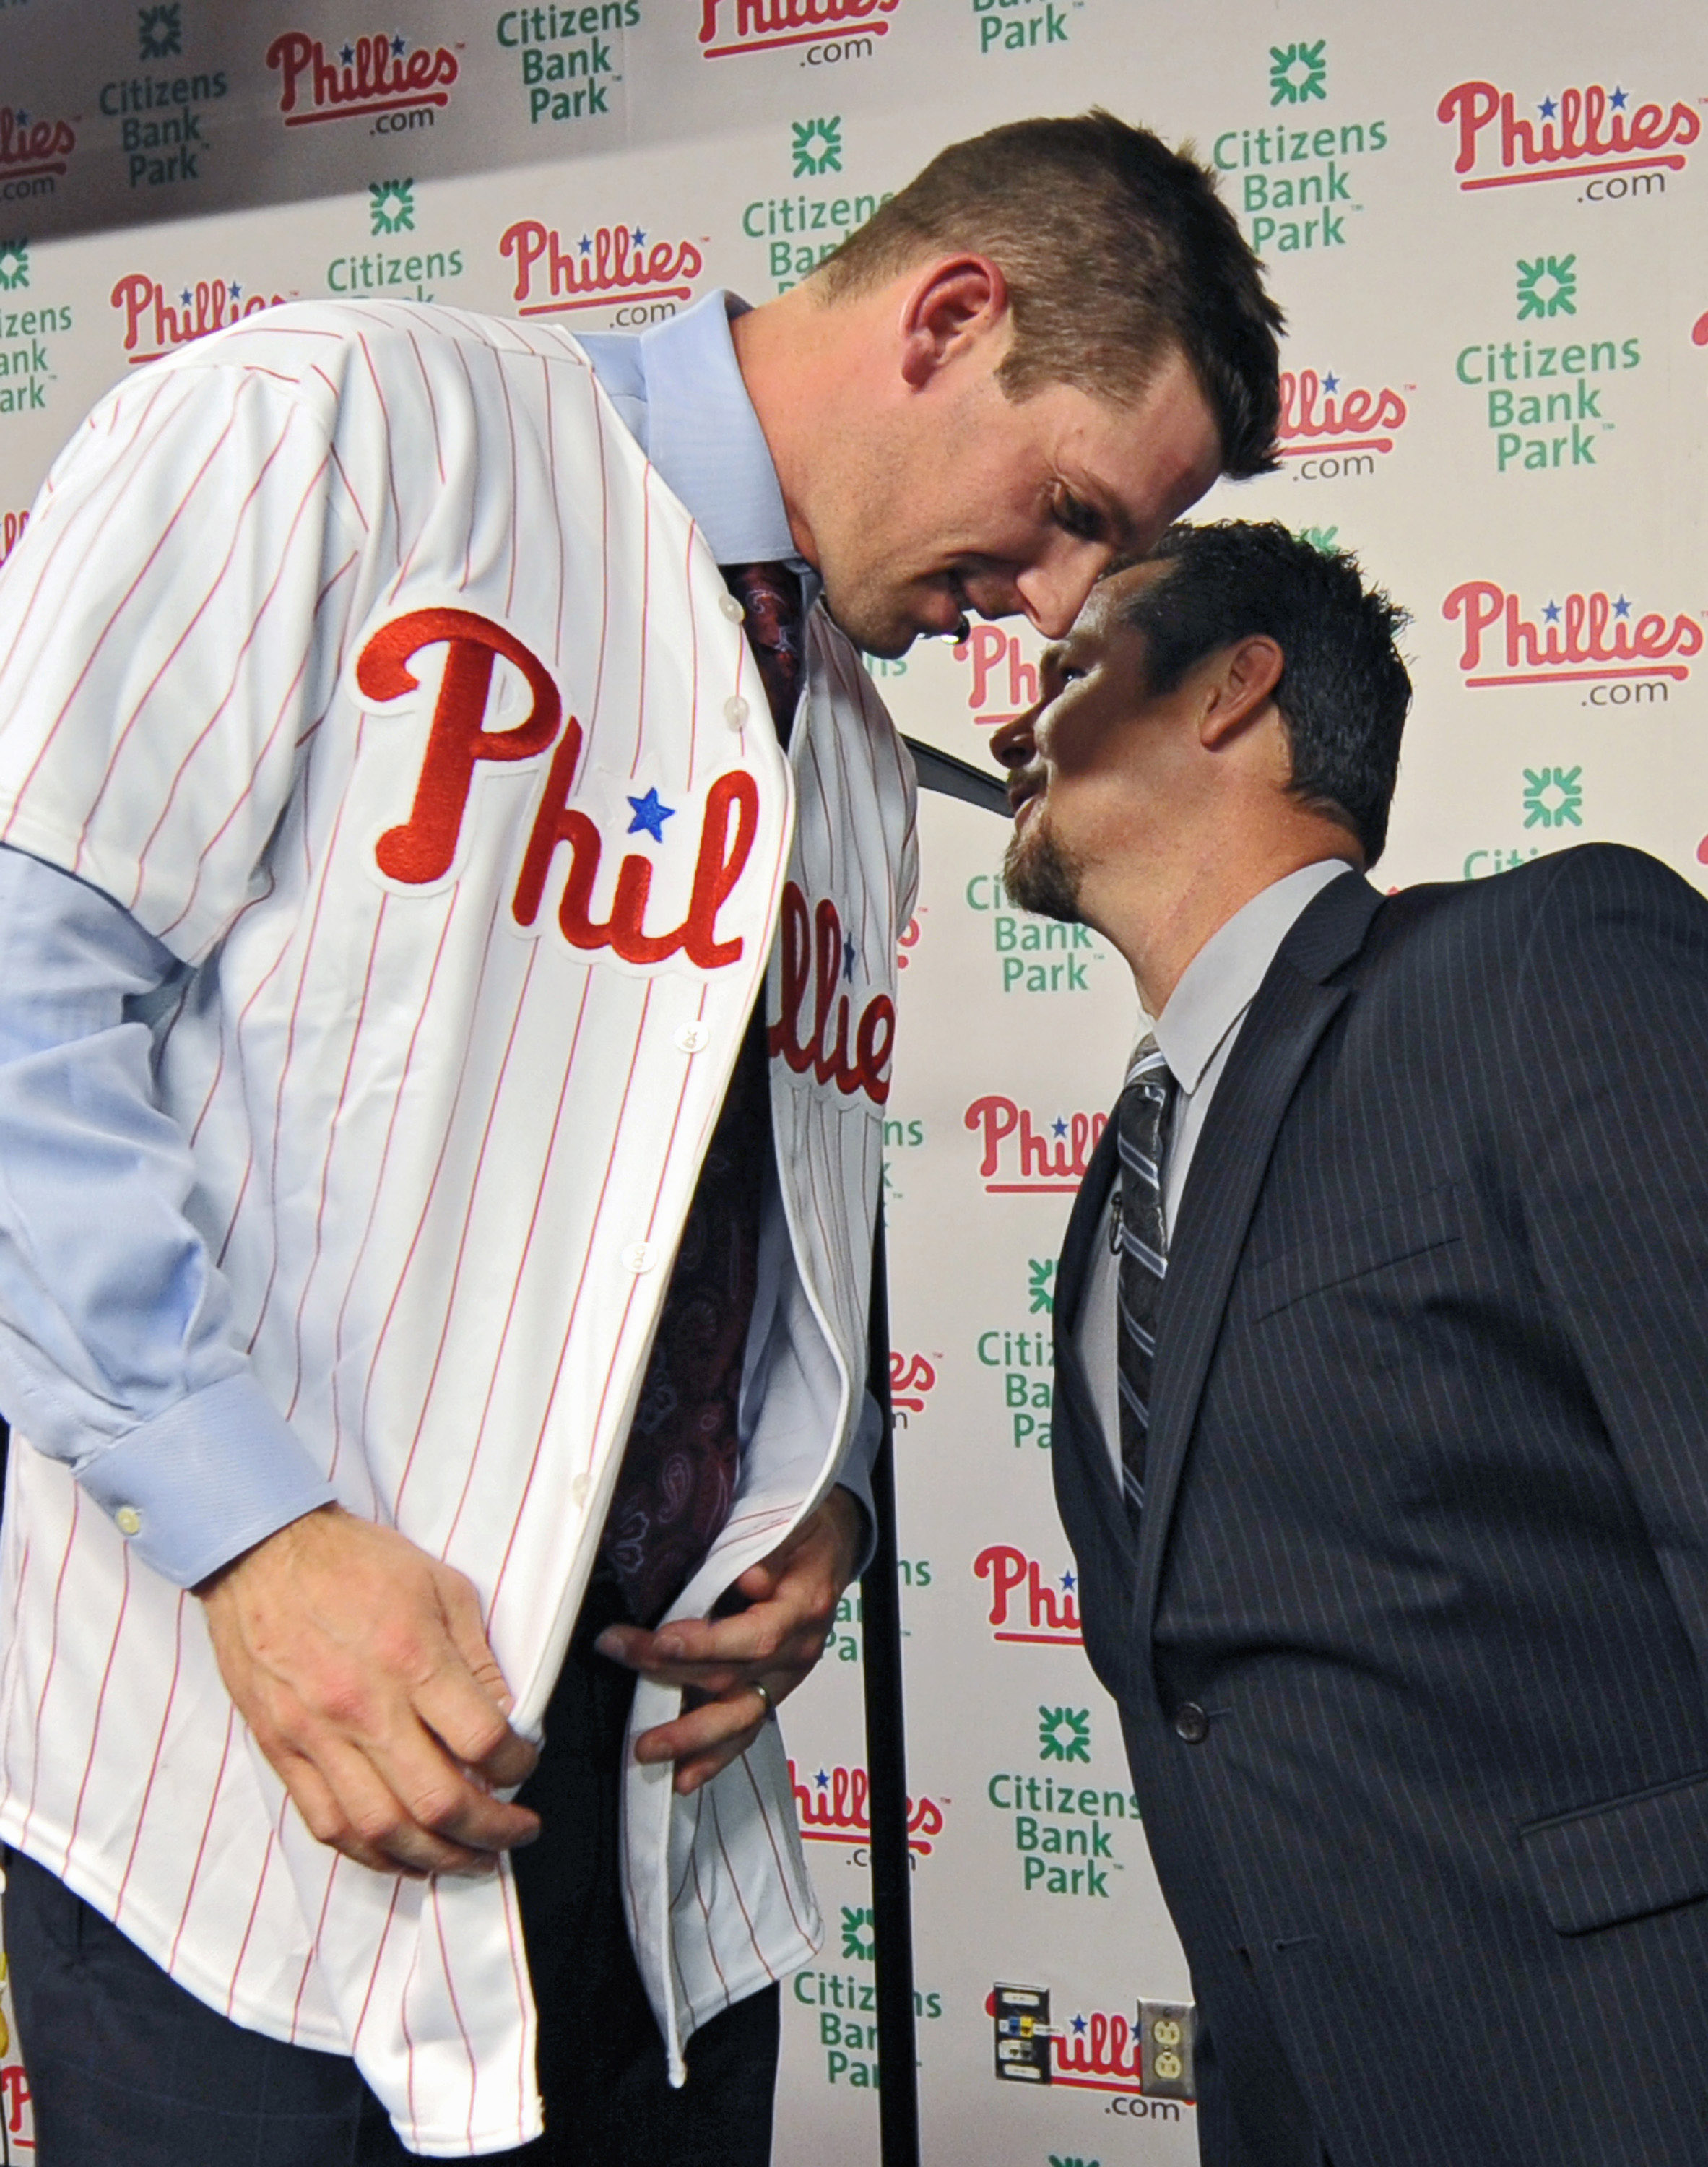 PHILADELPHIA - DECEMBER 15: Pitcher Cliff Lee #33 of the Philadelphia Phillies talks with former pitcher Mitch Williams after being introduced to the media during a press conference at Citizens Bank Park on December 15, 2010 in Philadelphia, Pennsylvania.